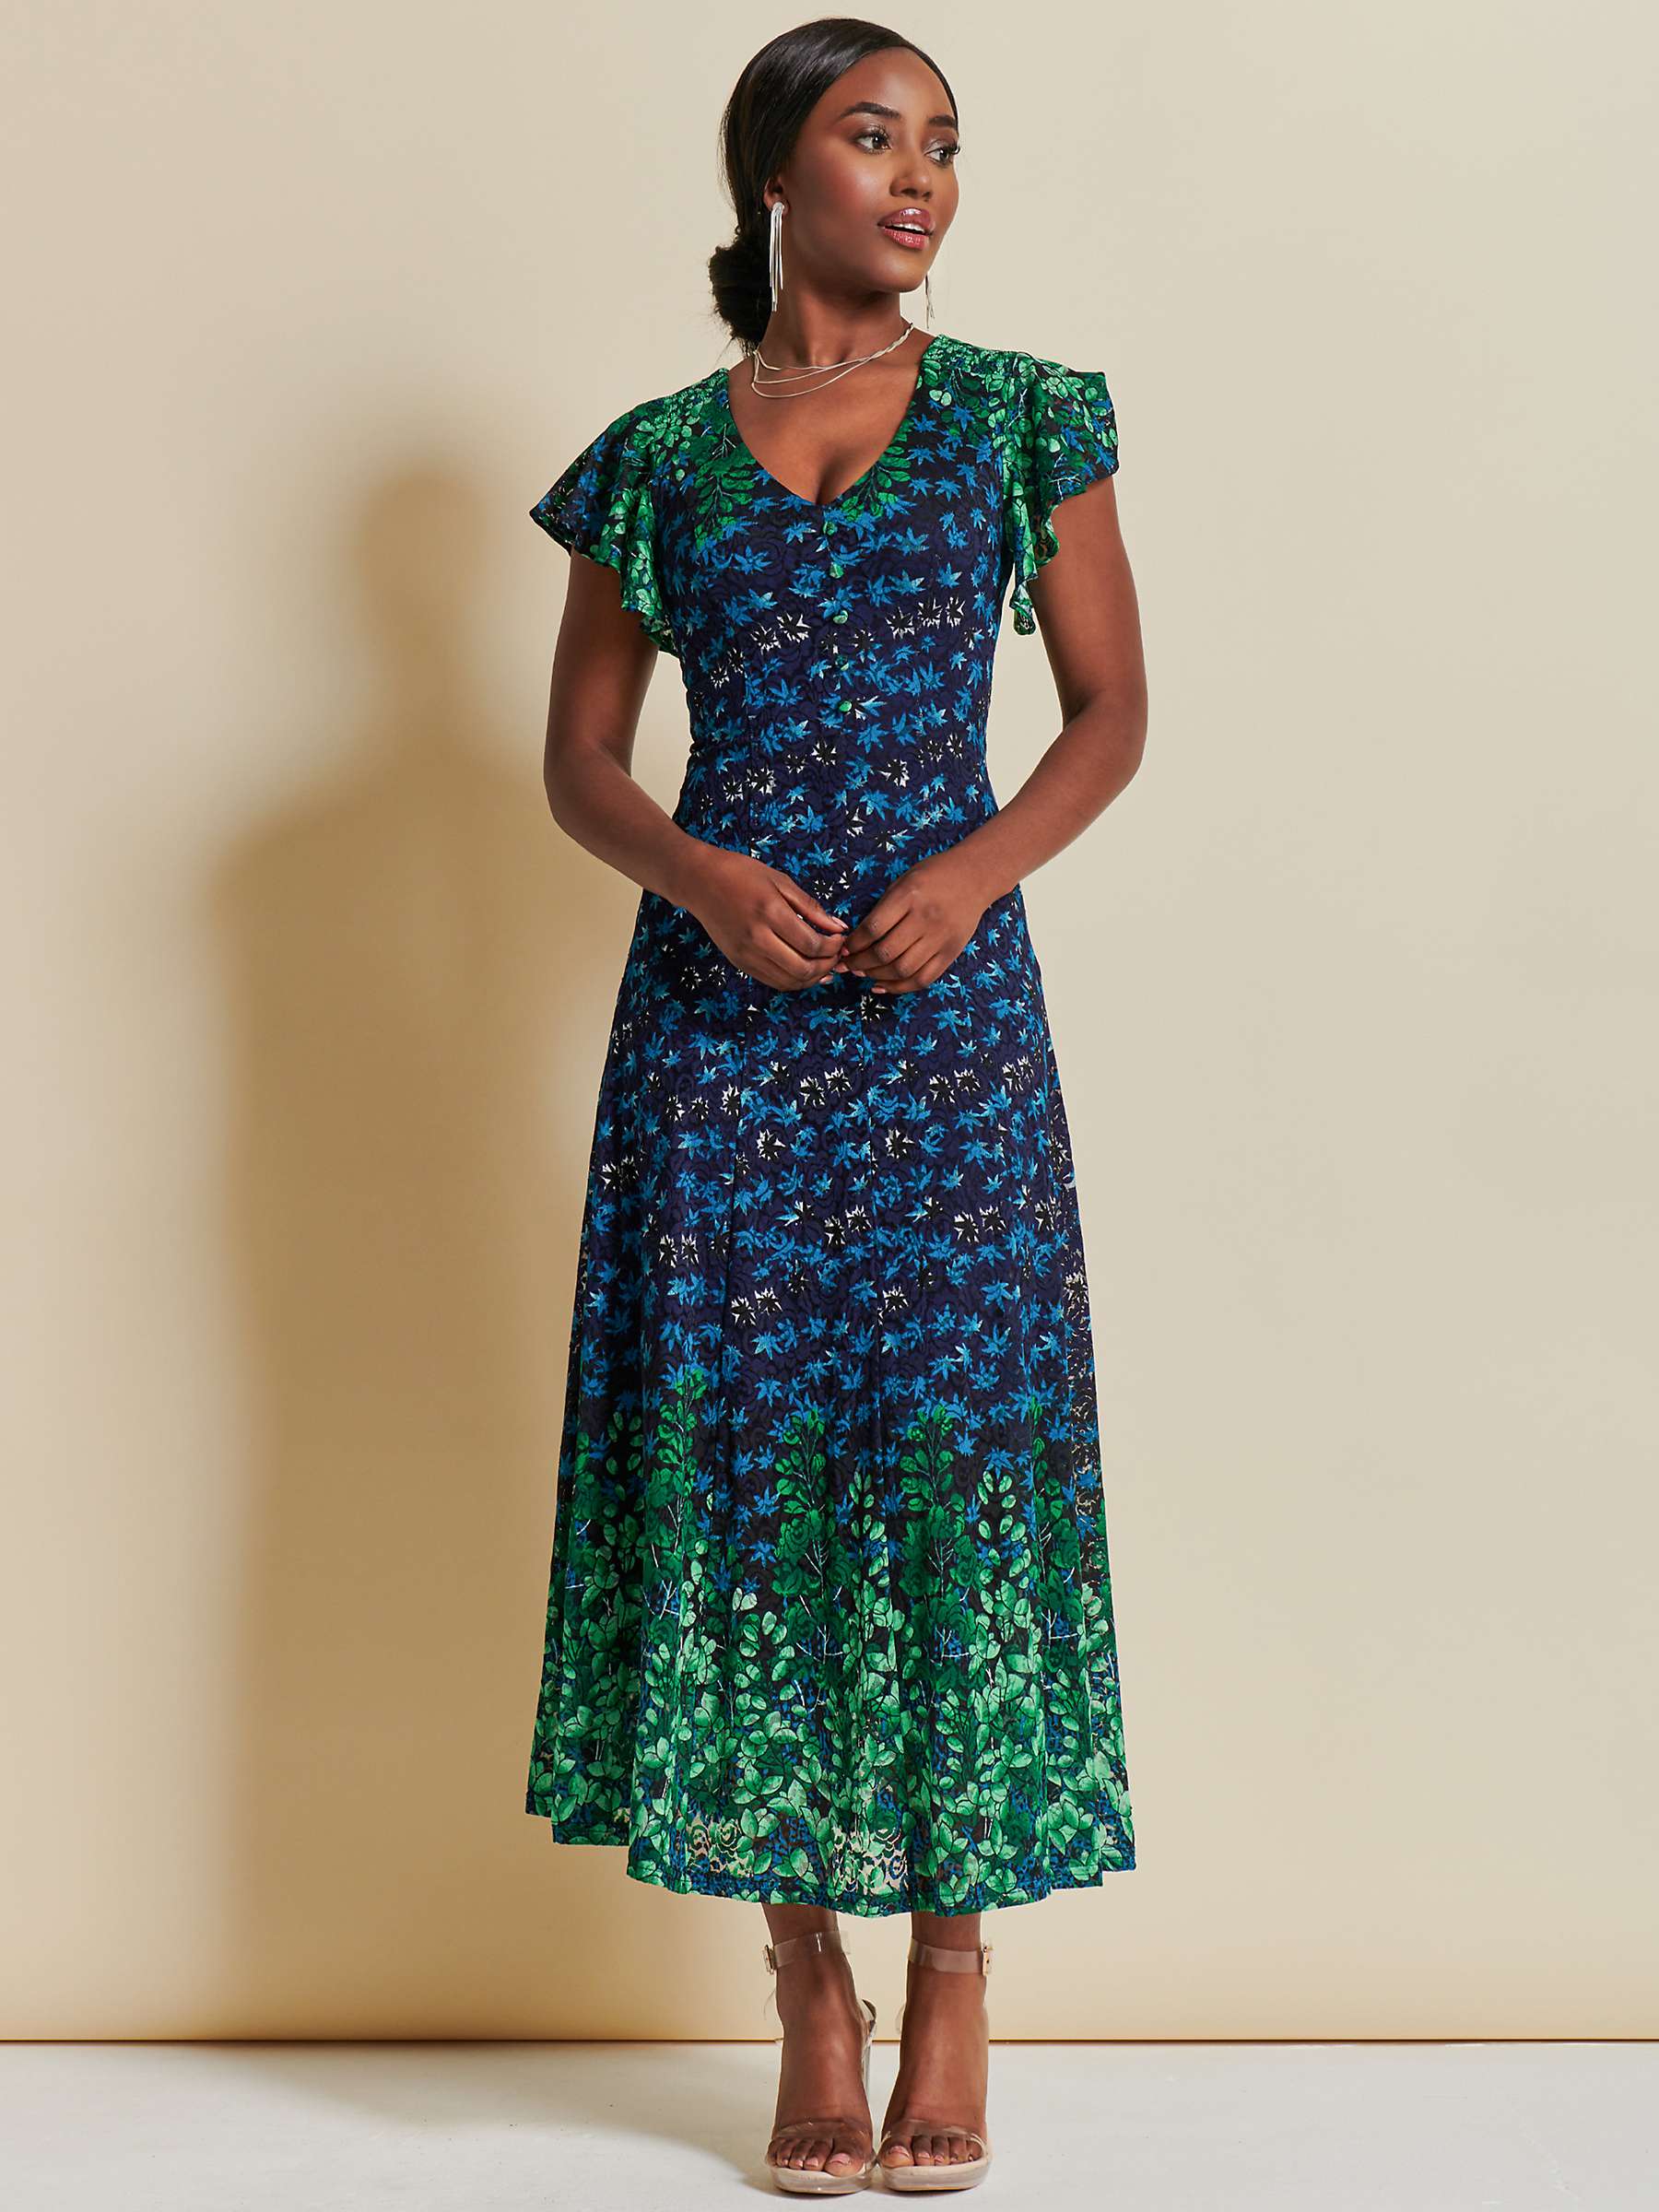 Buy Jolie Moi Floral Mirrored Lace Maxi Dress, Green/Multi Online at johnlewis.com